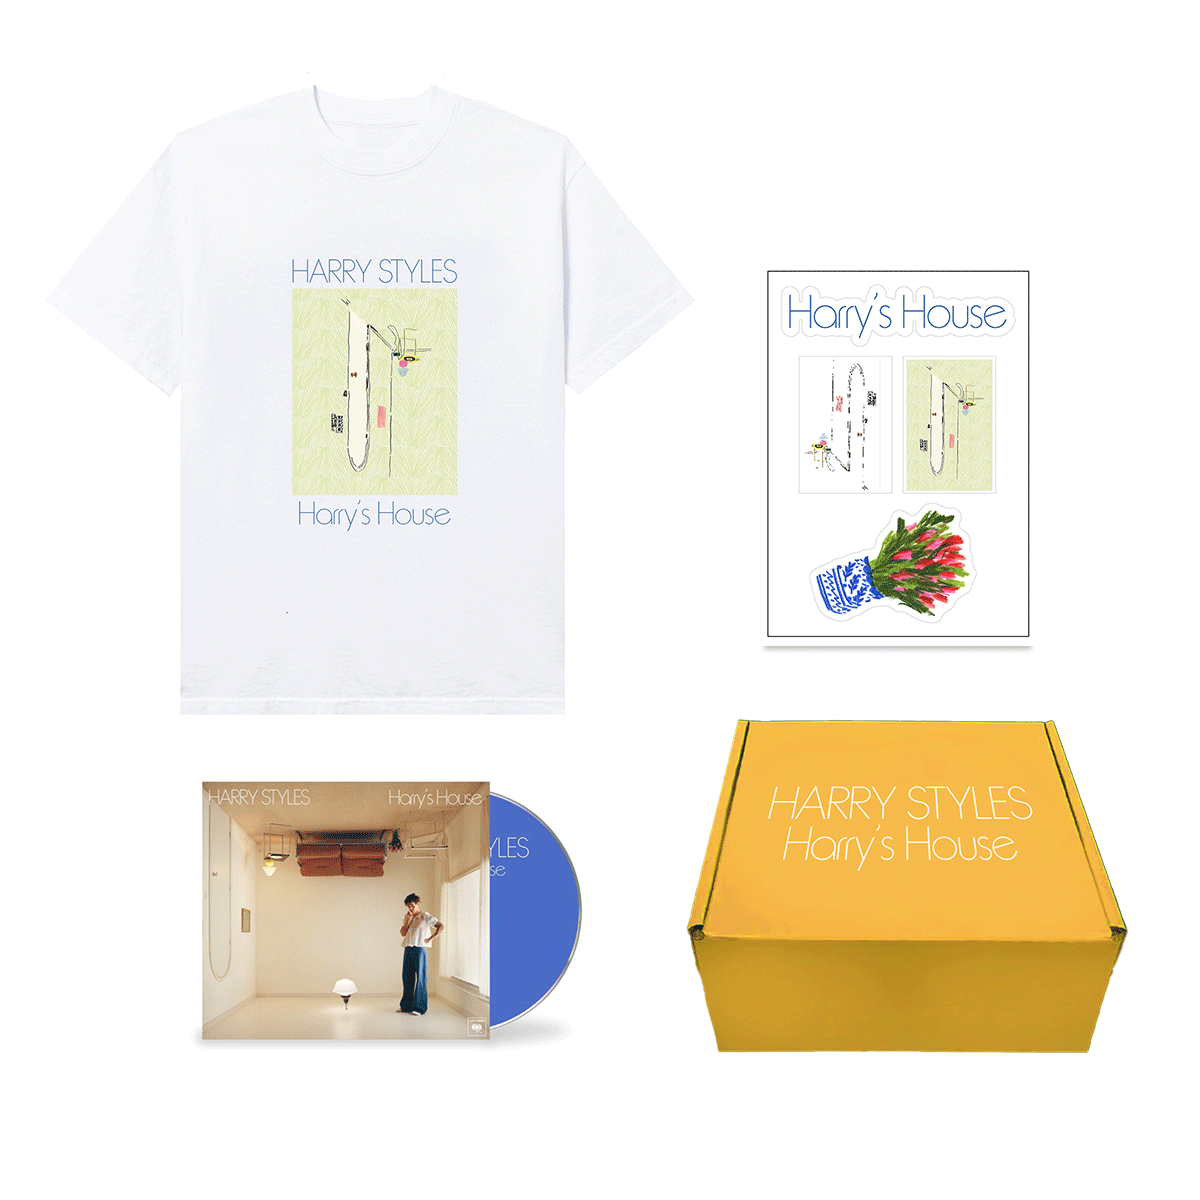 Limited Edition Harry’s House CD Blue Box Set